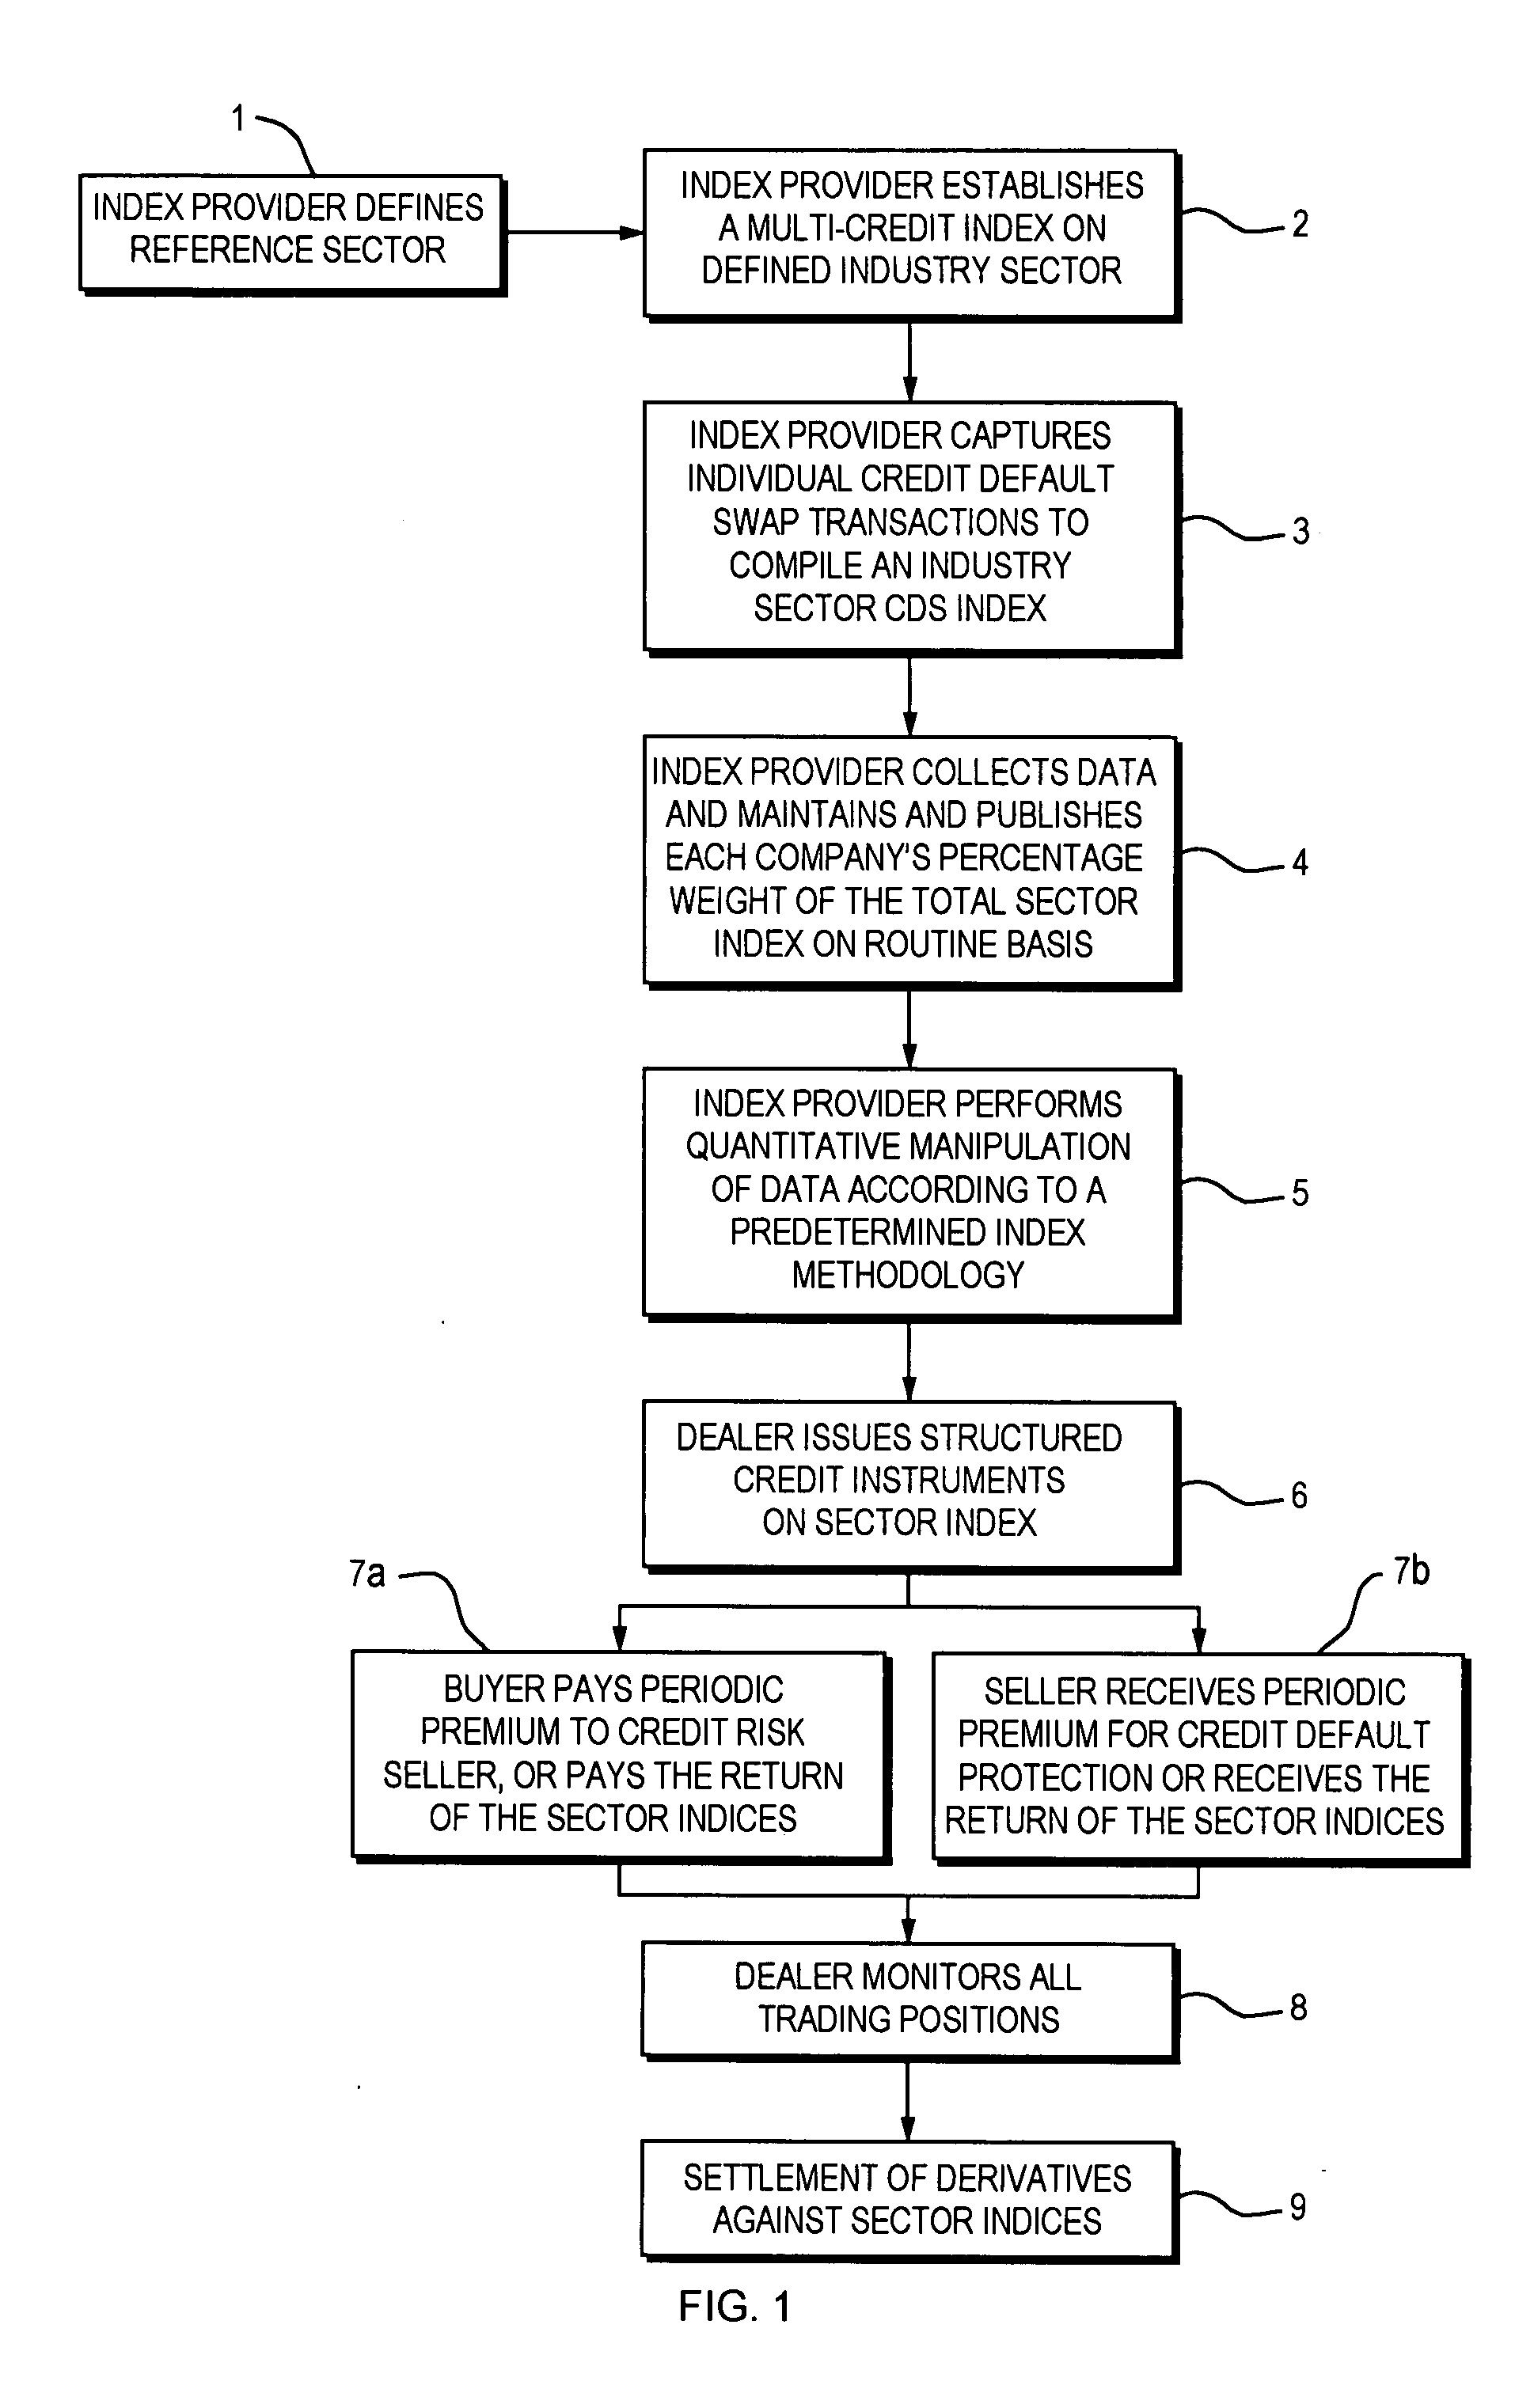 Process and method for establishing credit default swap indices on defined economic sectors to support the creation, trading and clearing of credit derivative instruments